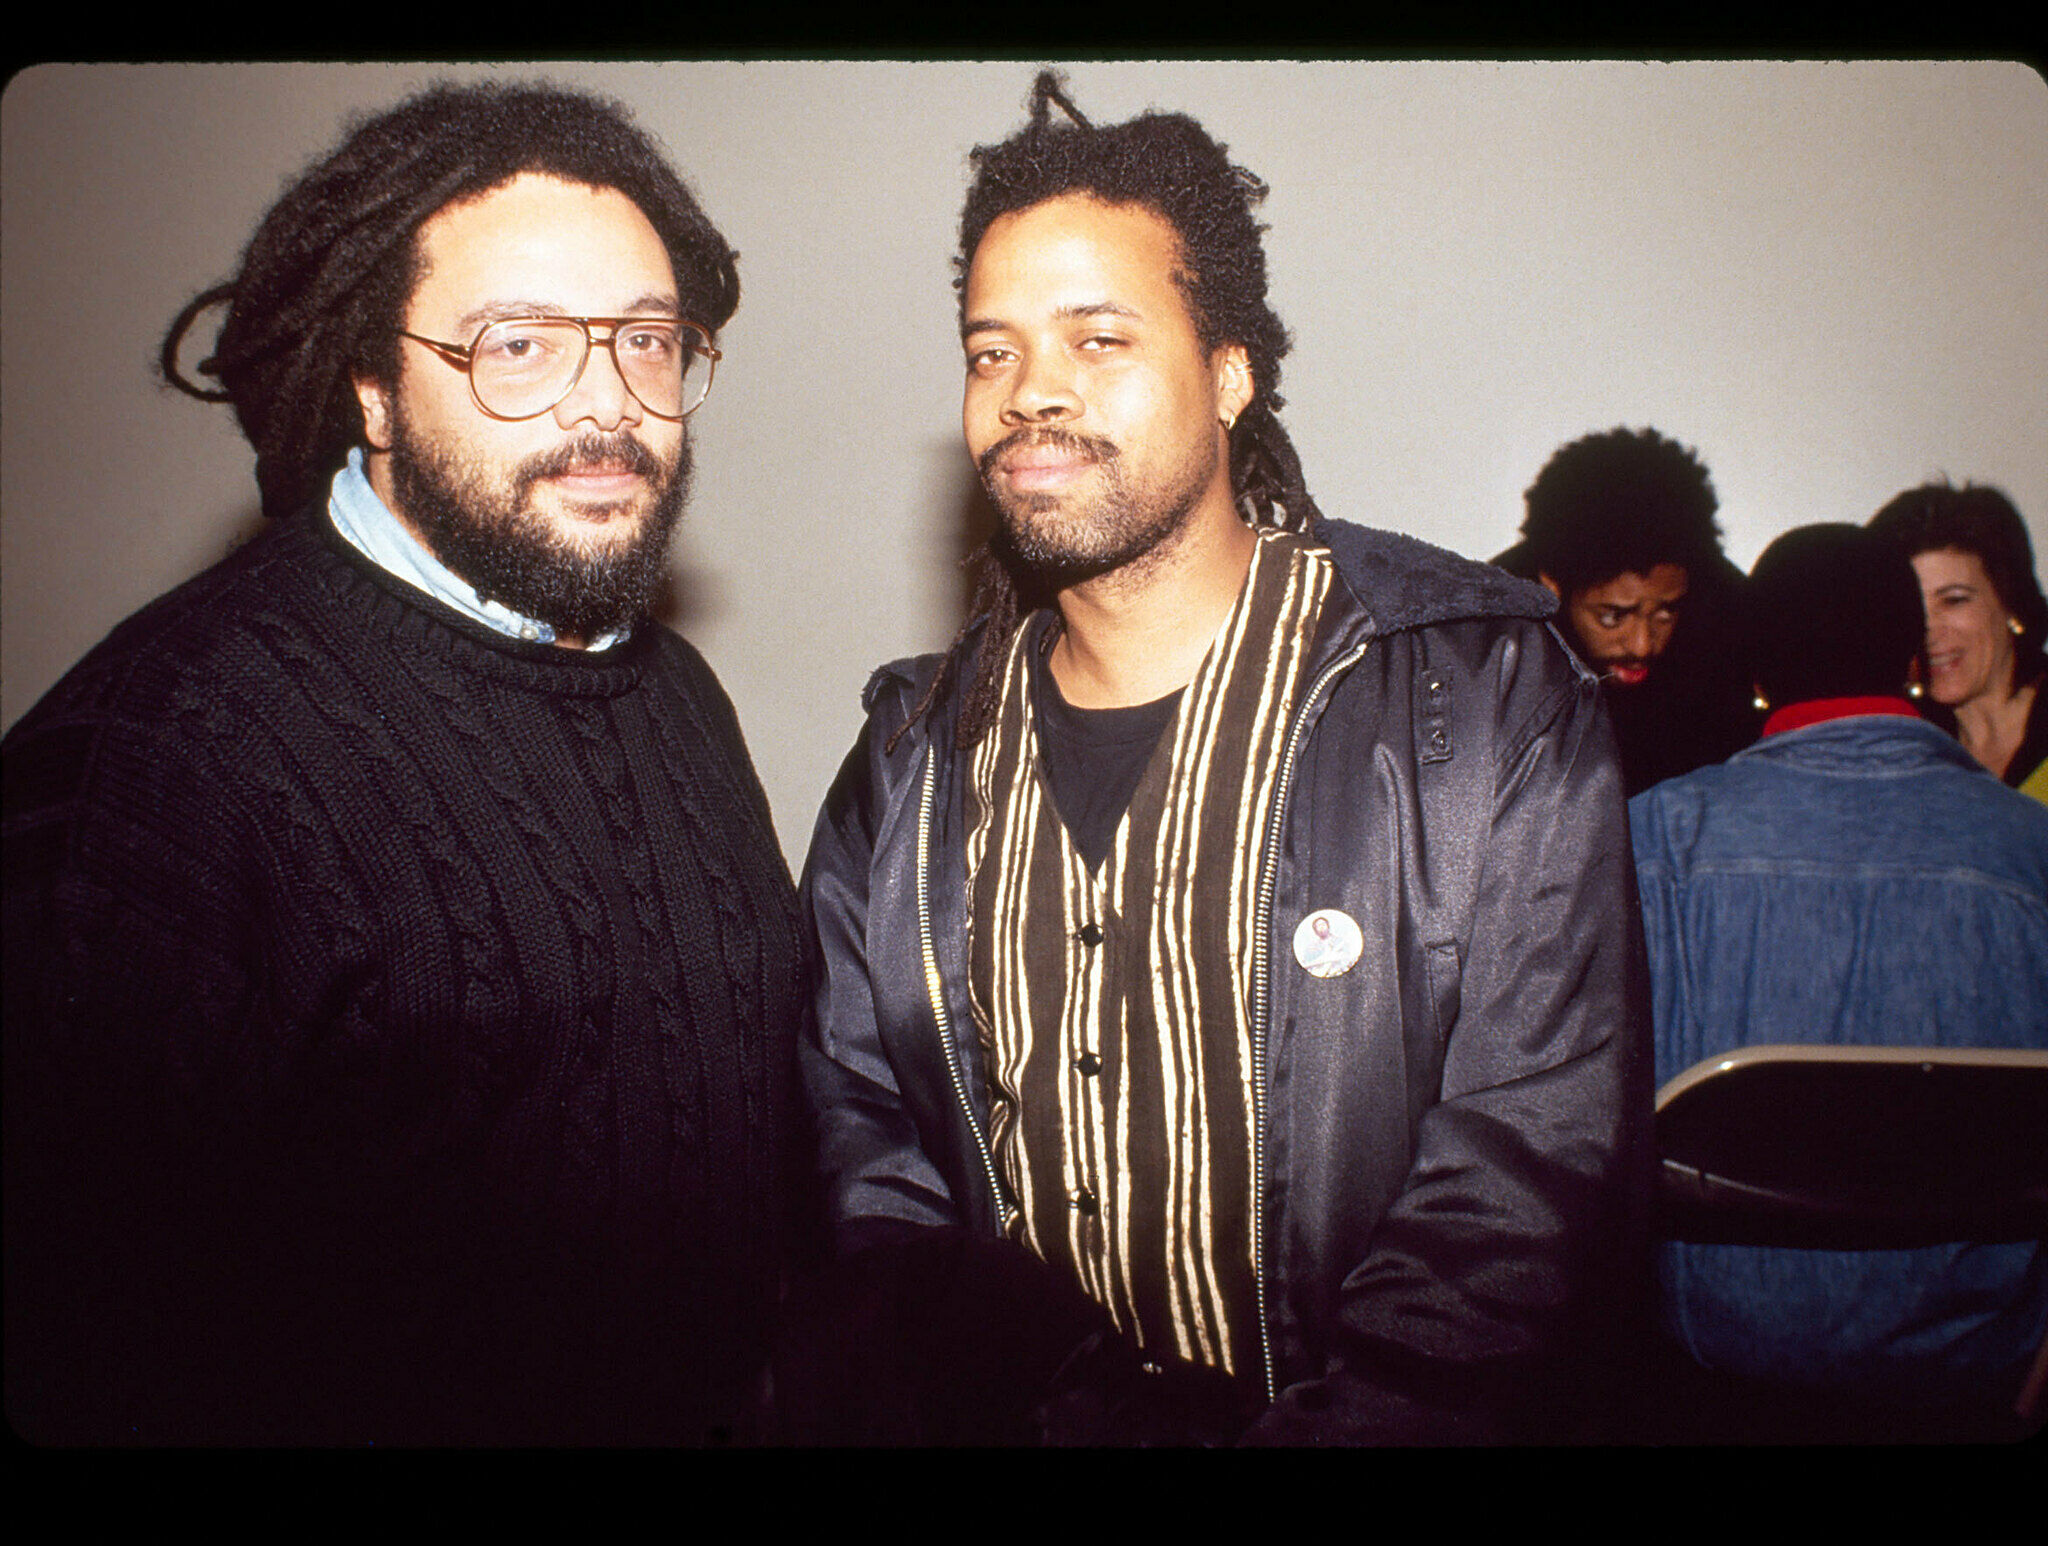 Two men with dreadlocks smiling at the camera, one in a black sweater, the other in a leather jacket, with people in the background.